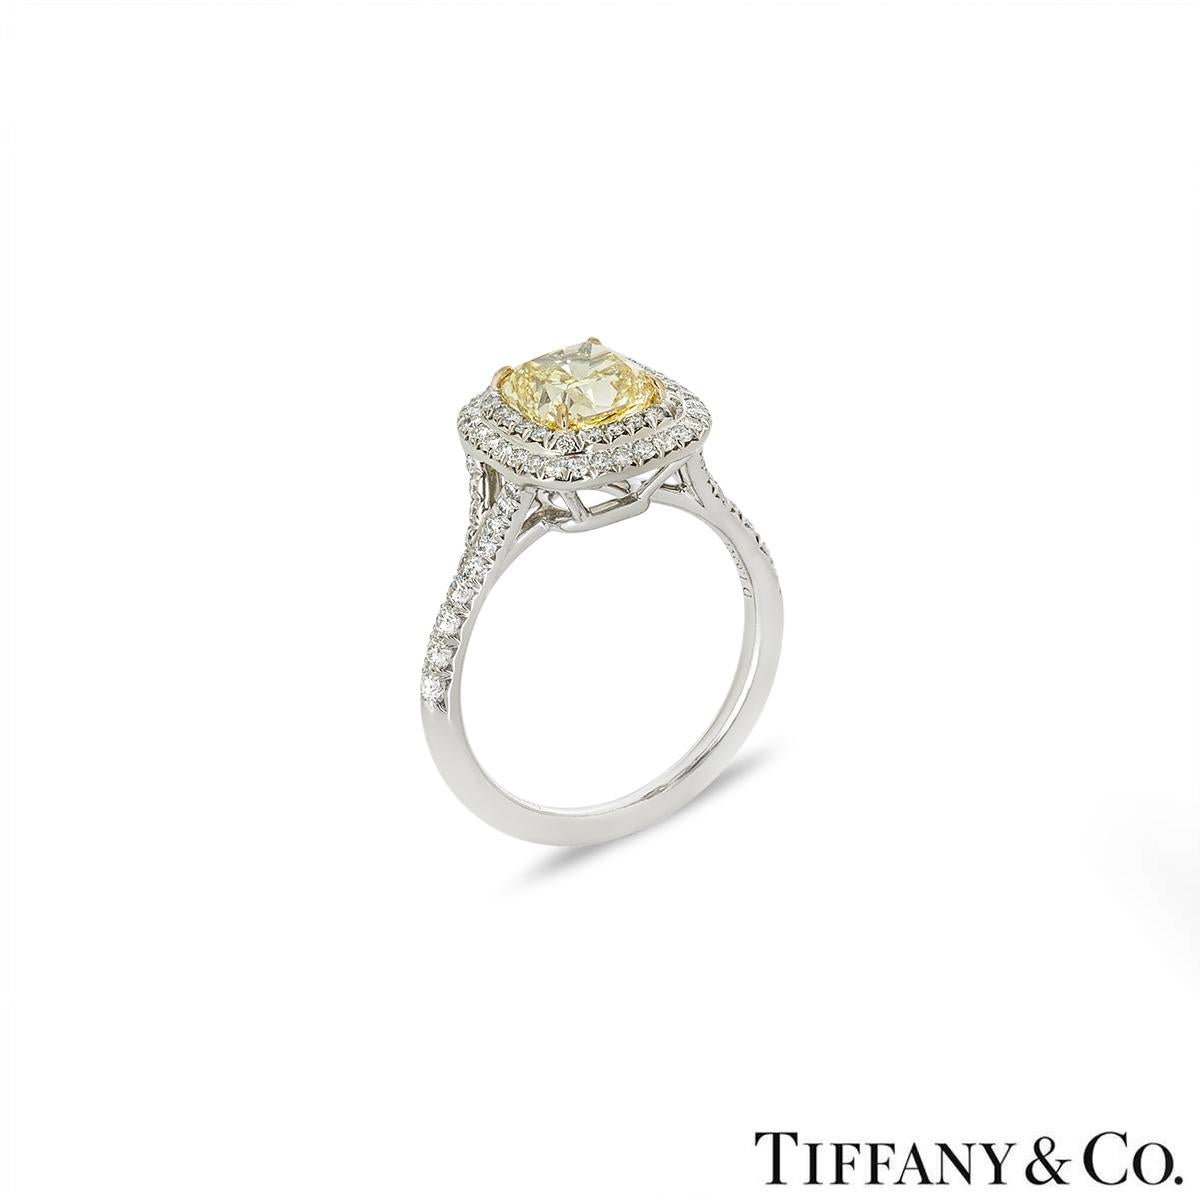 A stunning diamond ring in platinum from the Soleste collection by Tiffany & Co. The ring is set to the centre with a 1.63ct cushion cut fancy intense yellow diamond, with VS1 clarity. Complementing the centre diamond is a double halo and a split